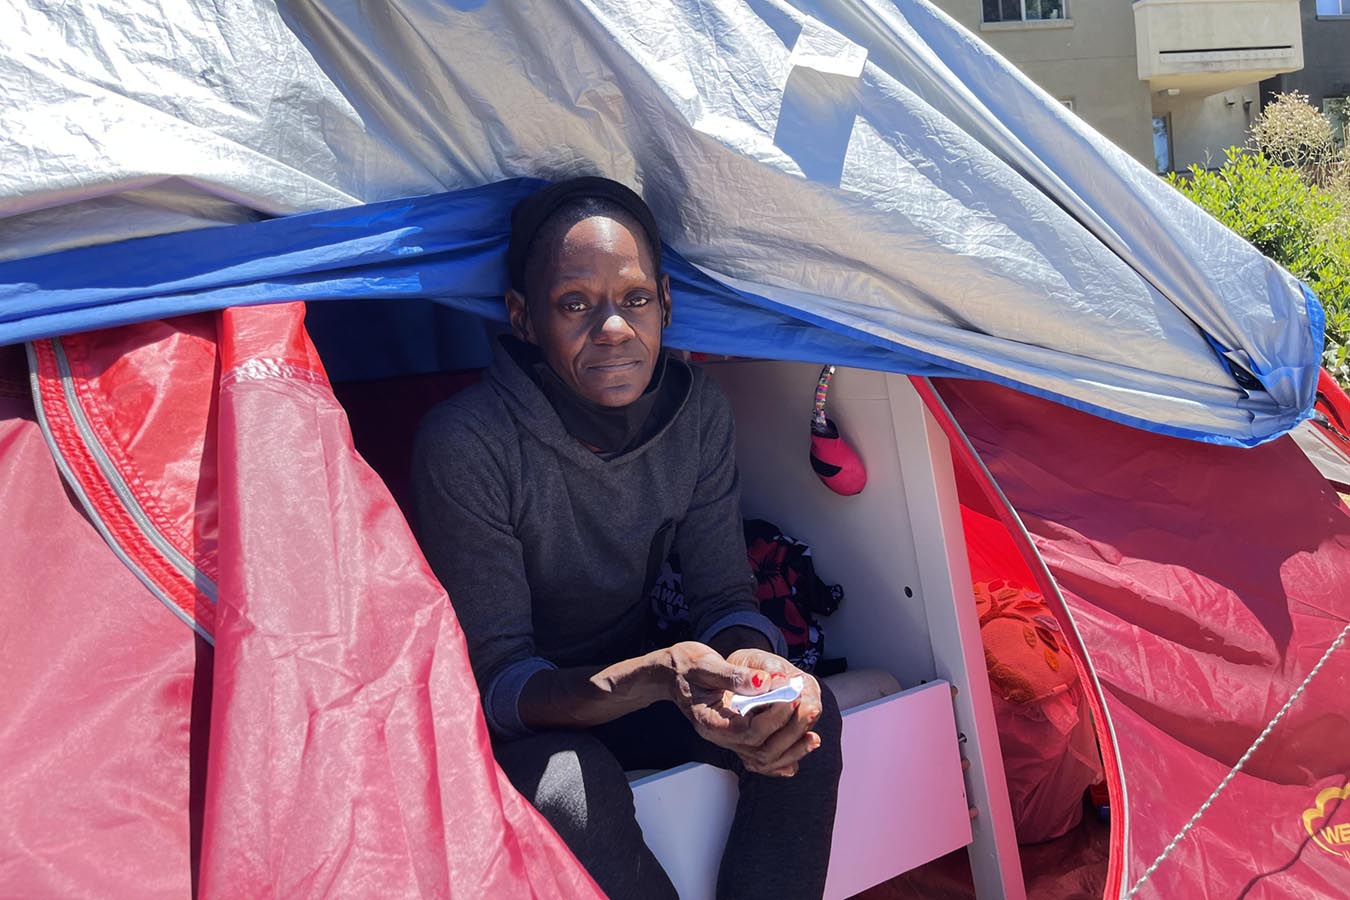 Woman with no hair sits in door of a tent on a bedframe, looking tired.